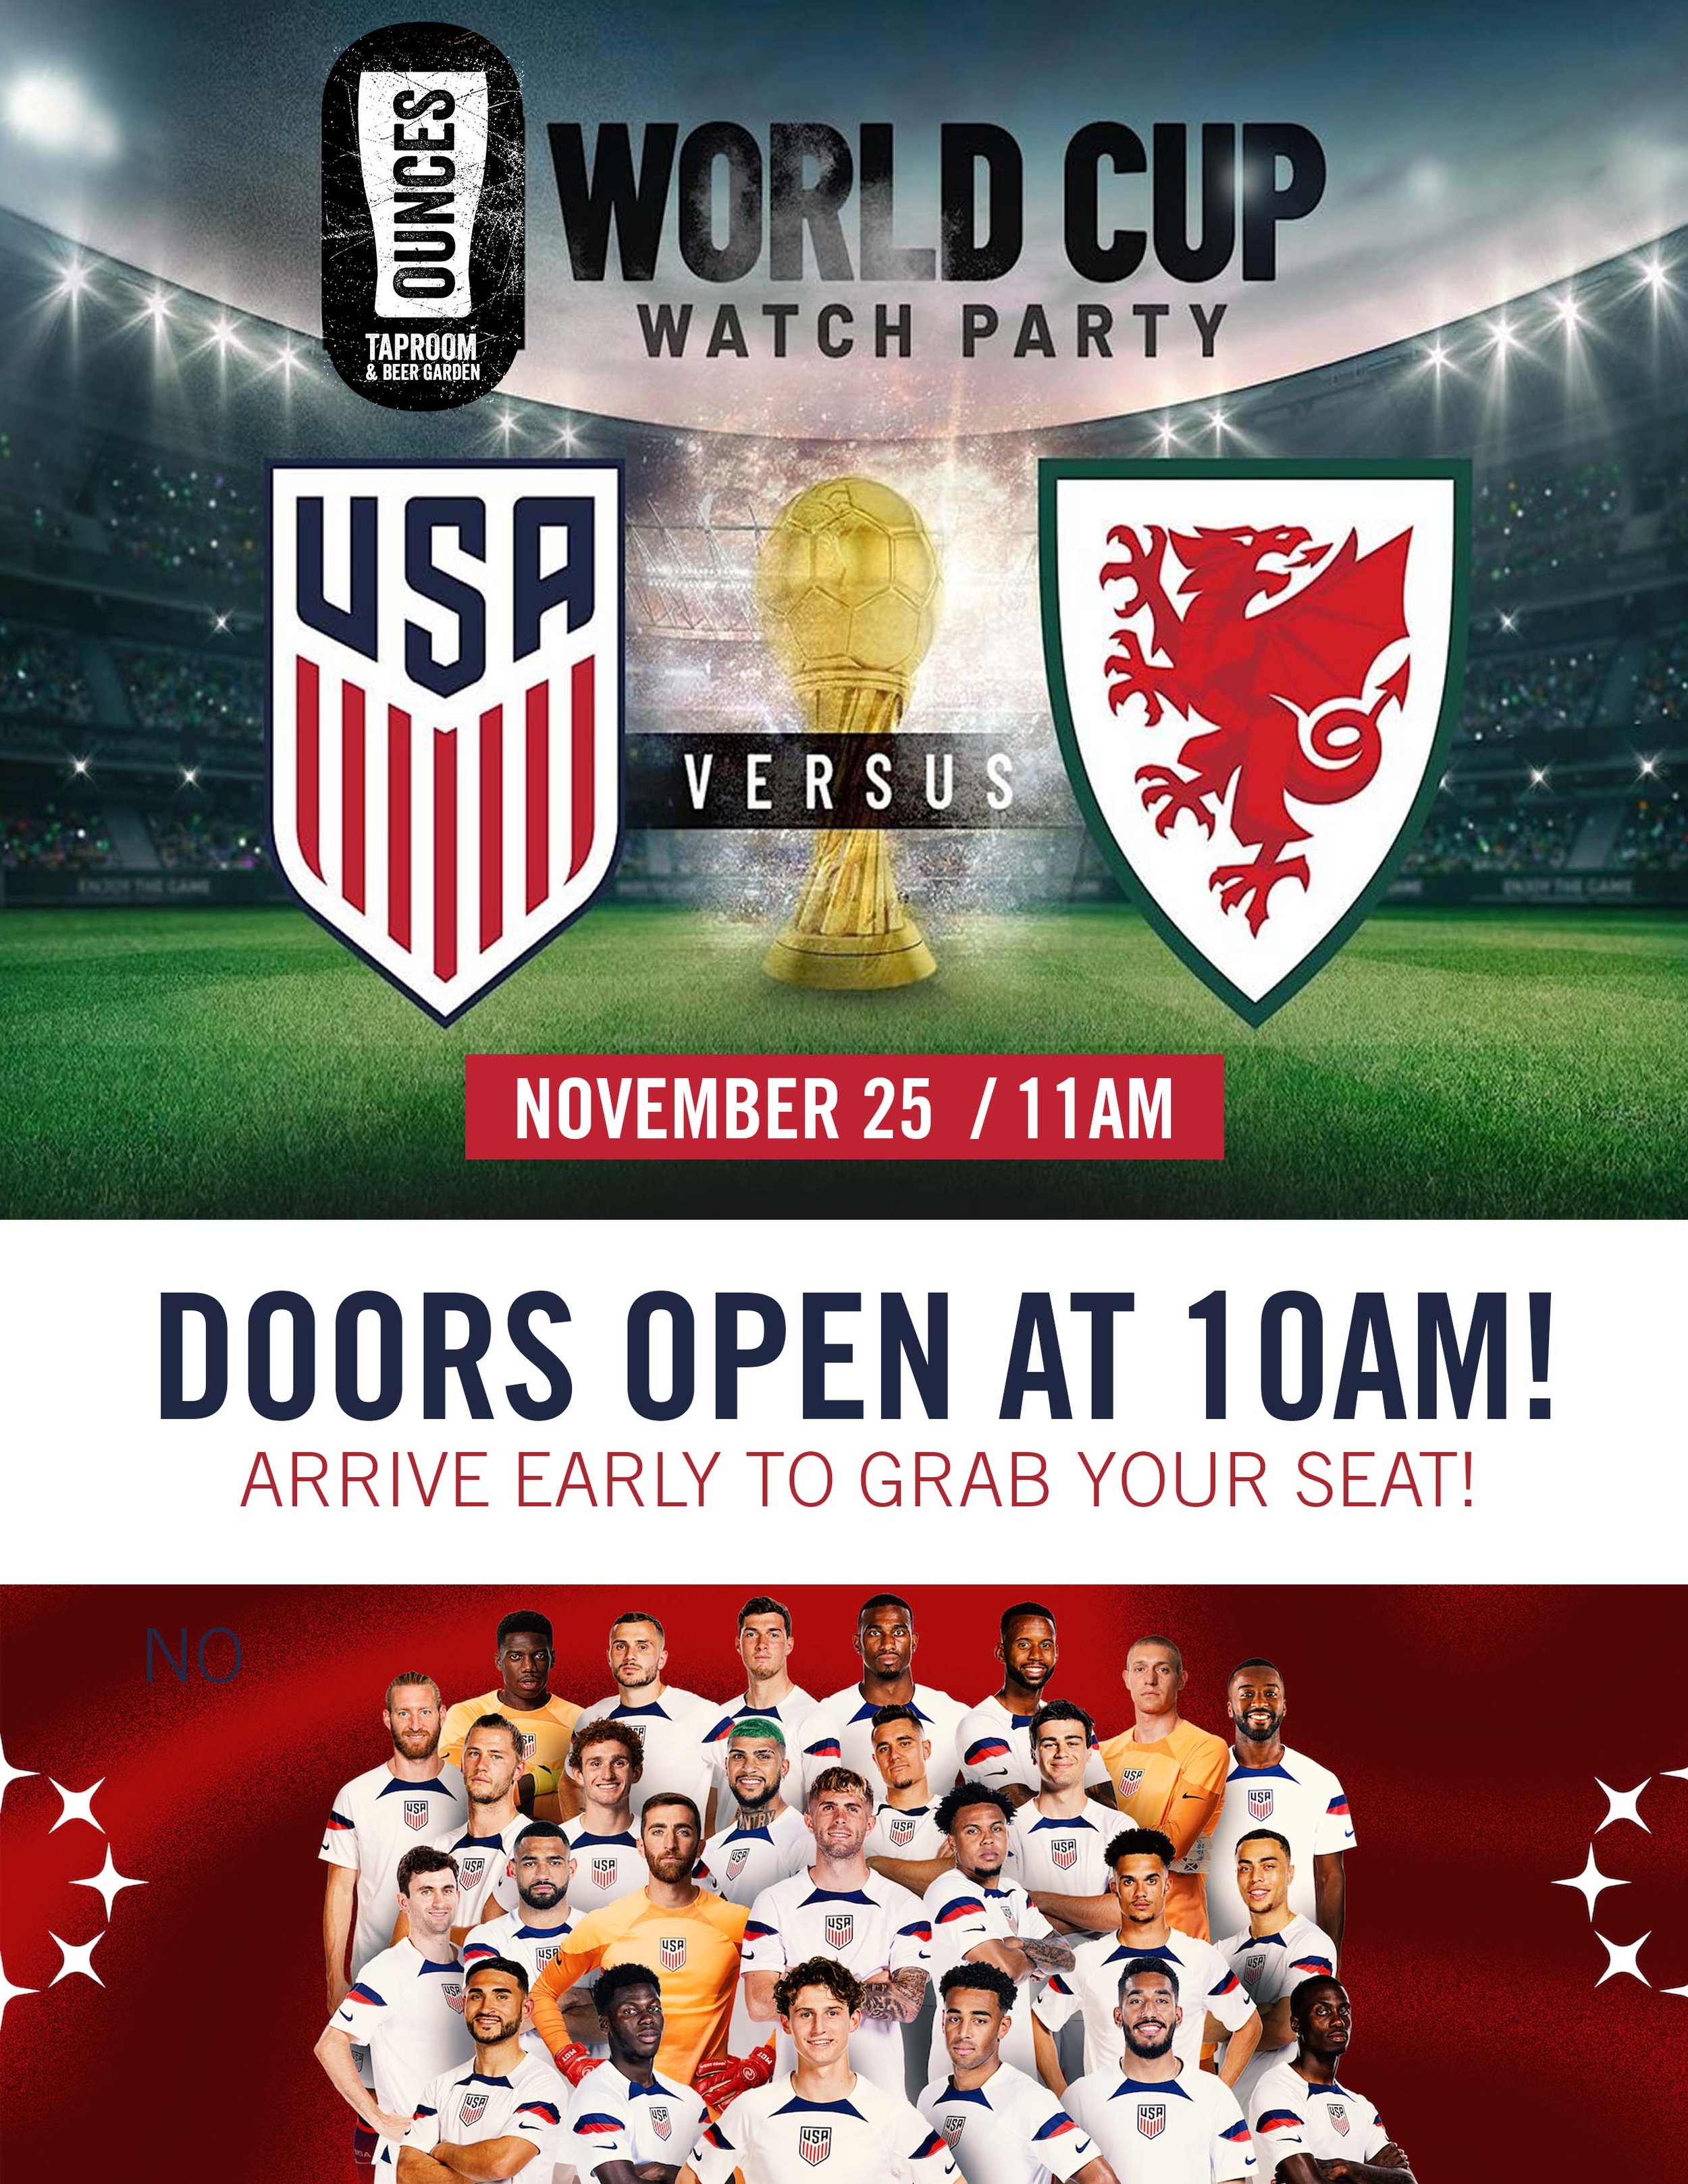 USA vs England World Cup Watch Party! — Ounces Taproom and Beer Garden